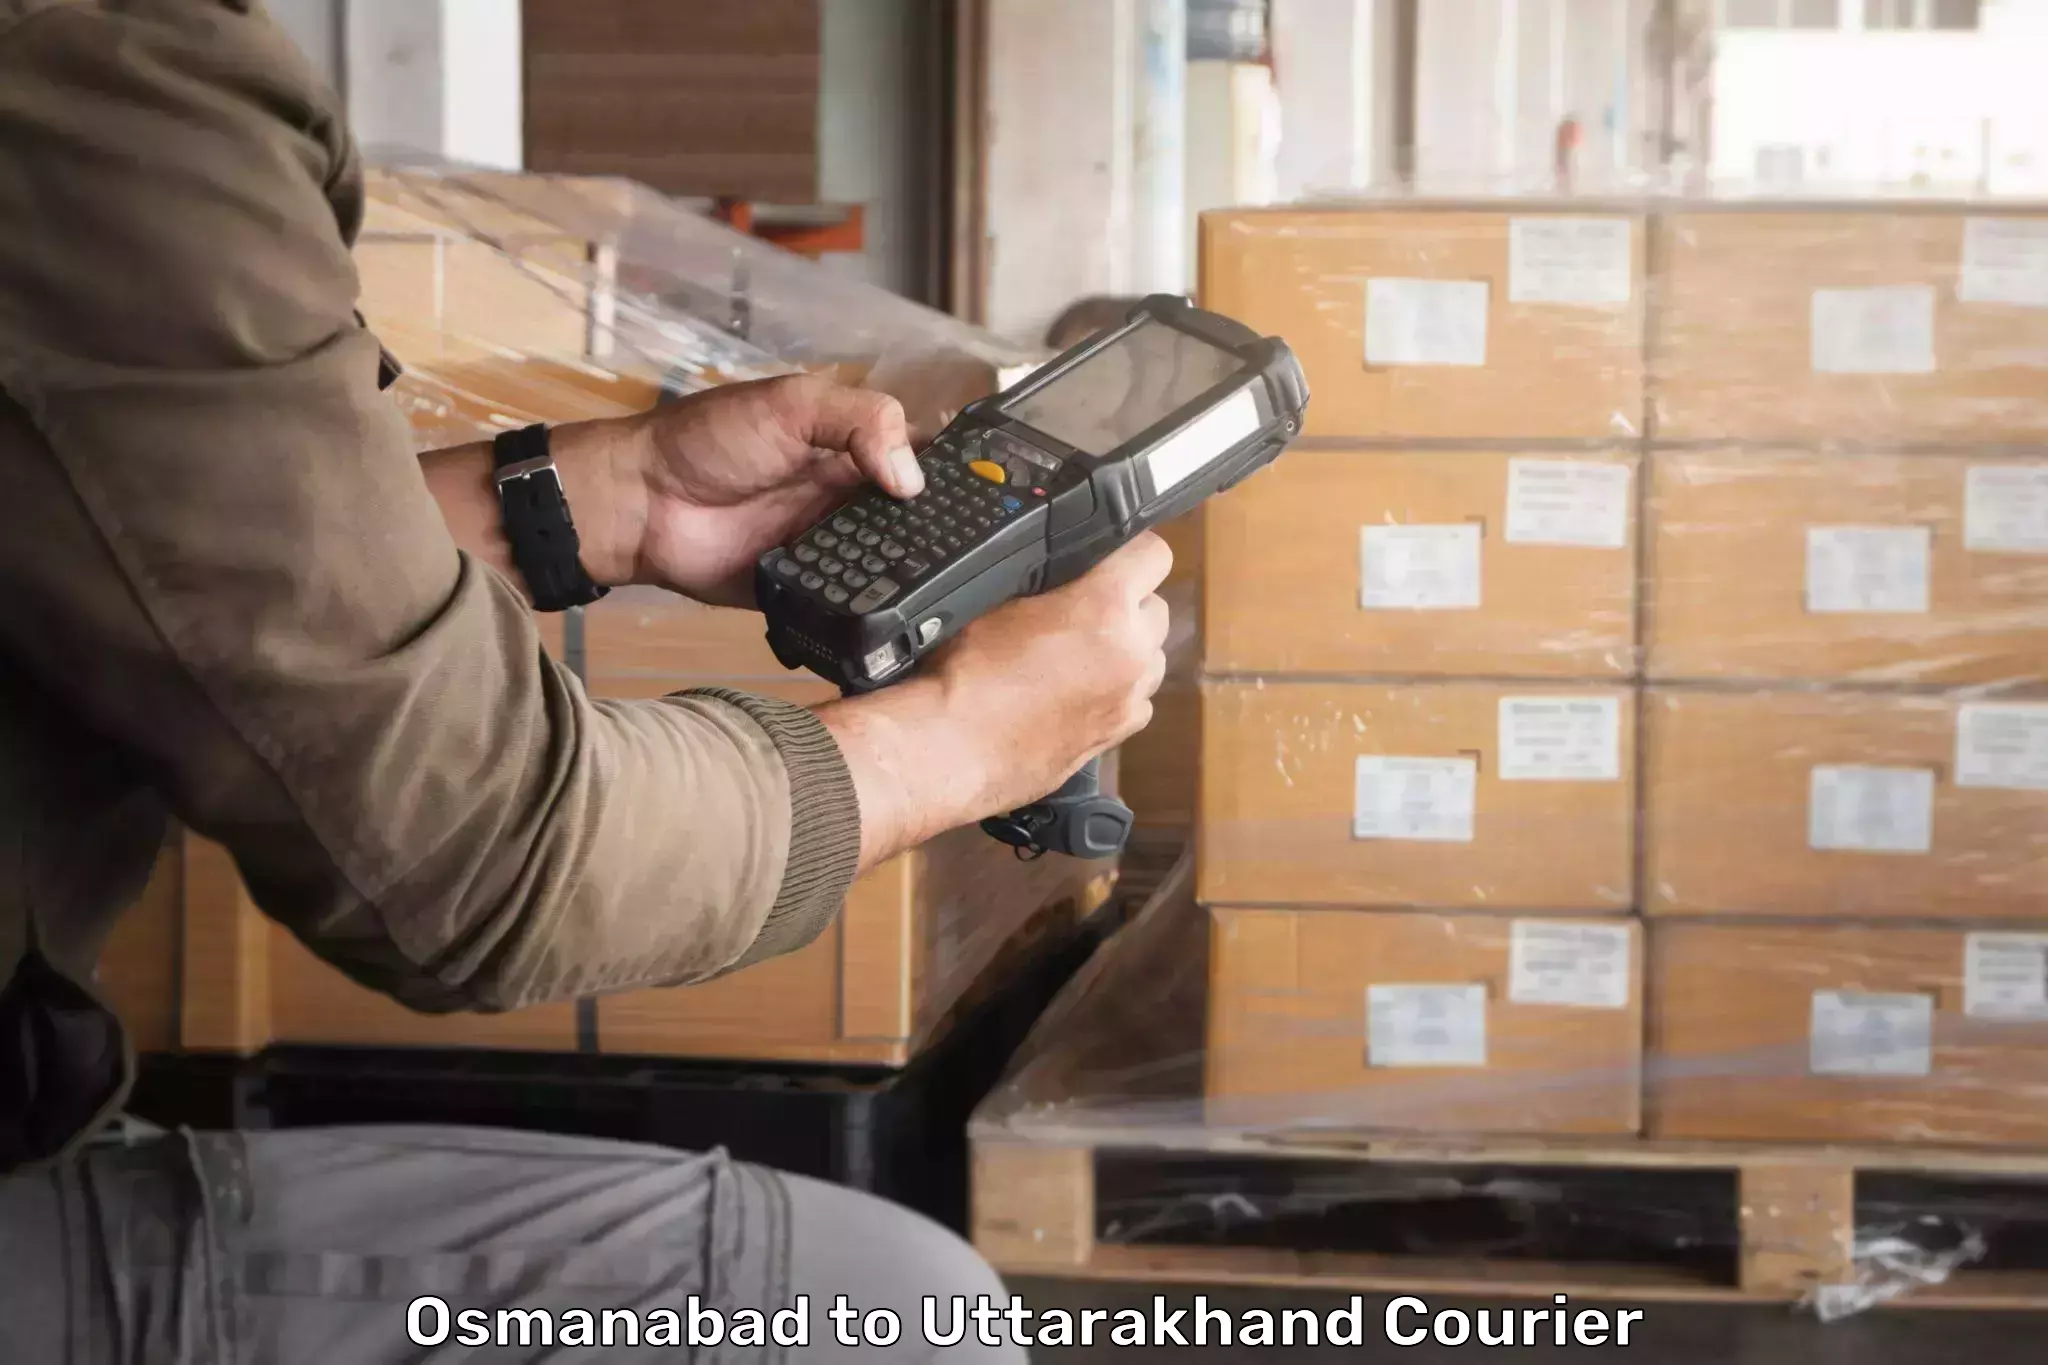 Express package handling in Osmanabad to Uttarakhand